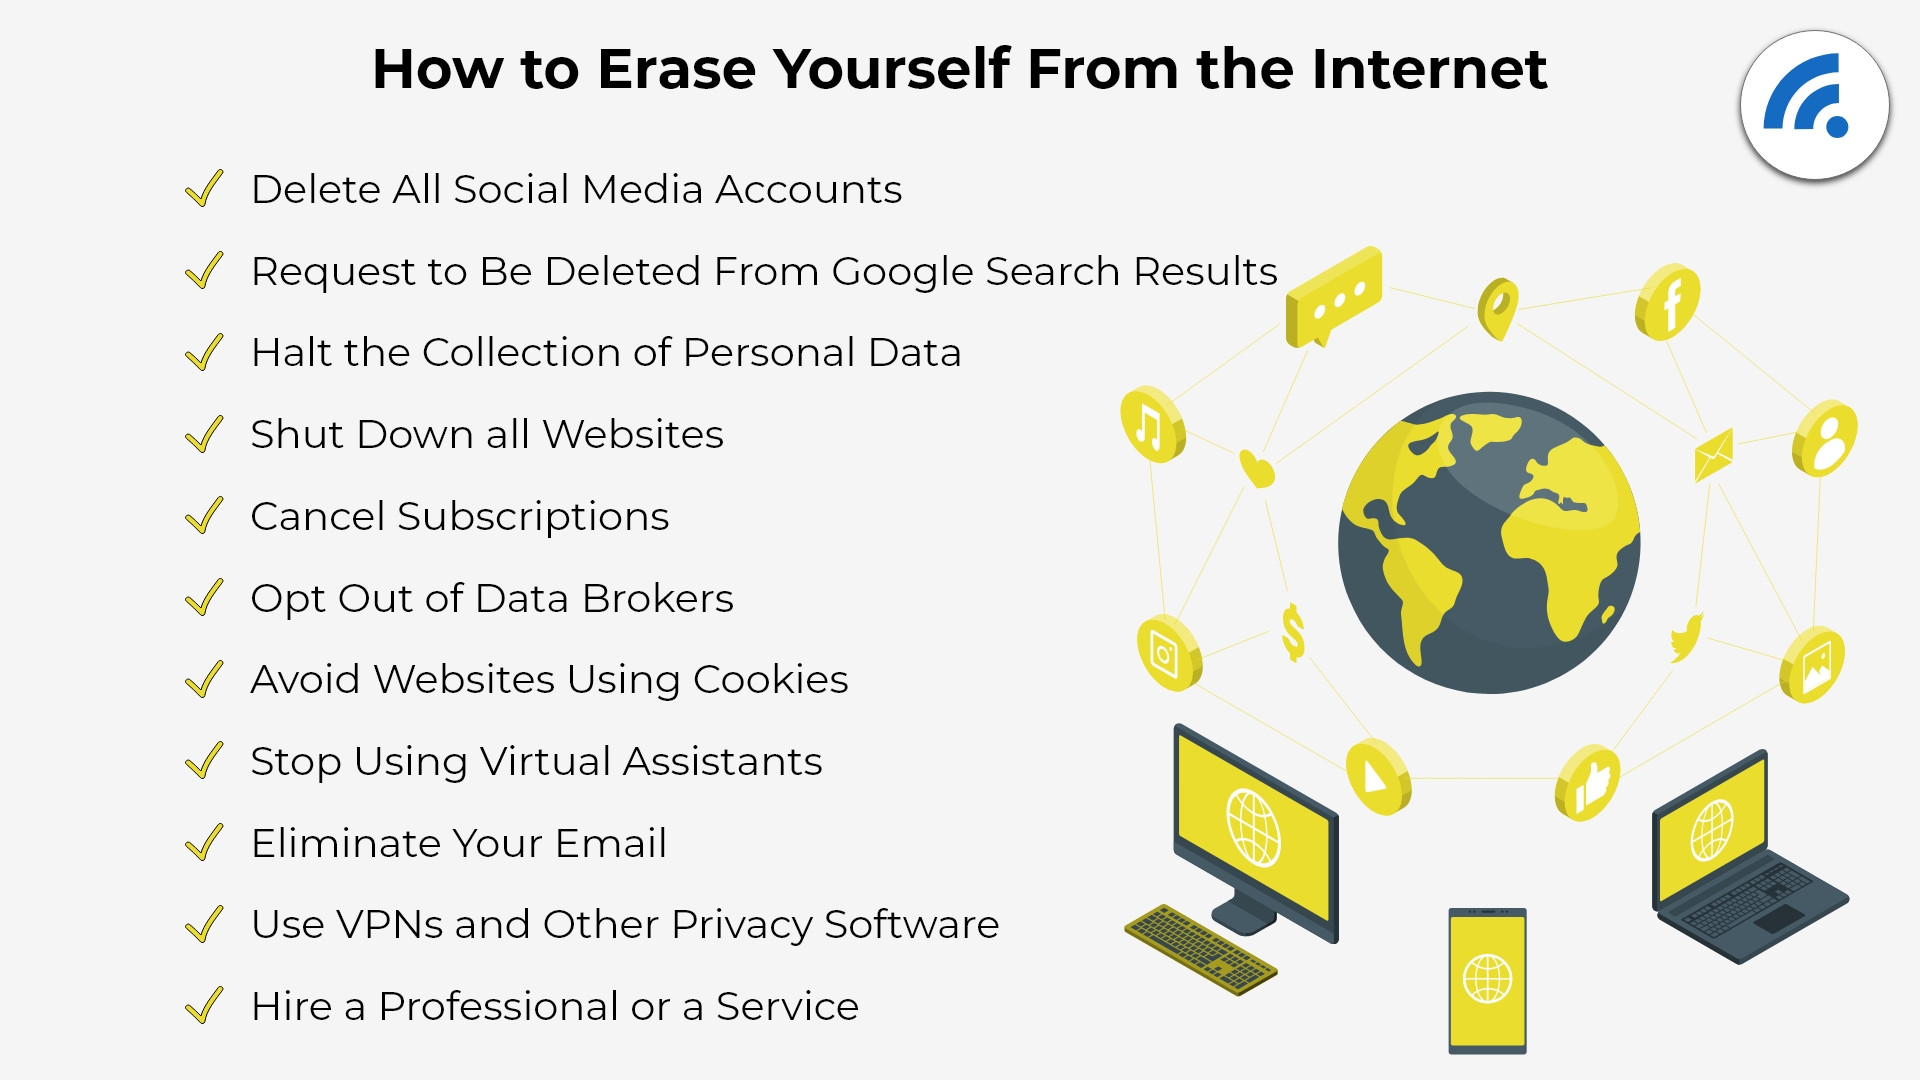 How to Erase Yourself and Your Information from the Internet